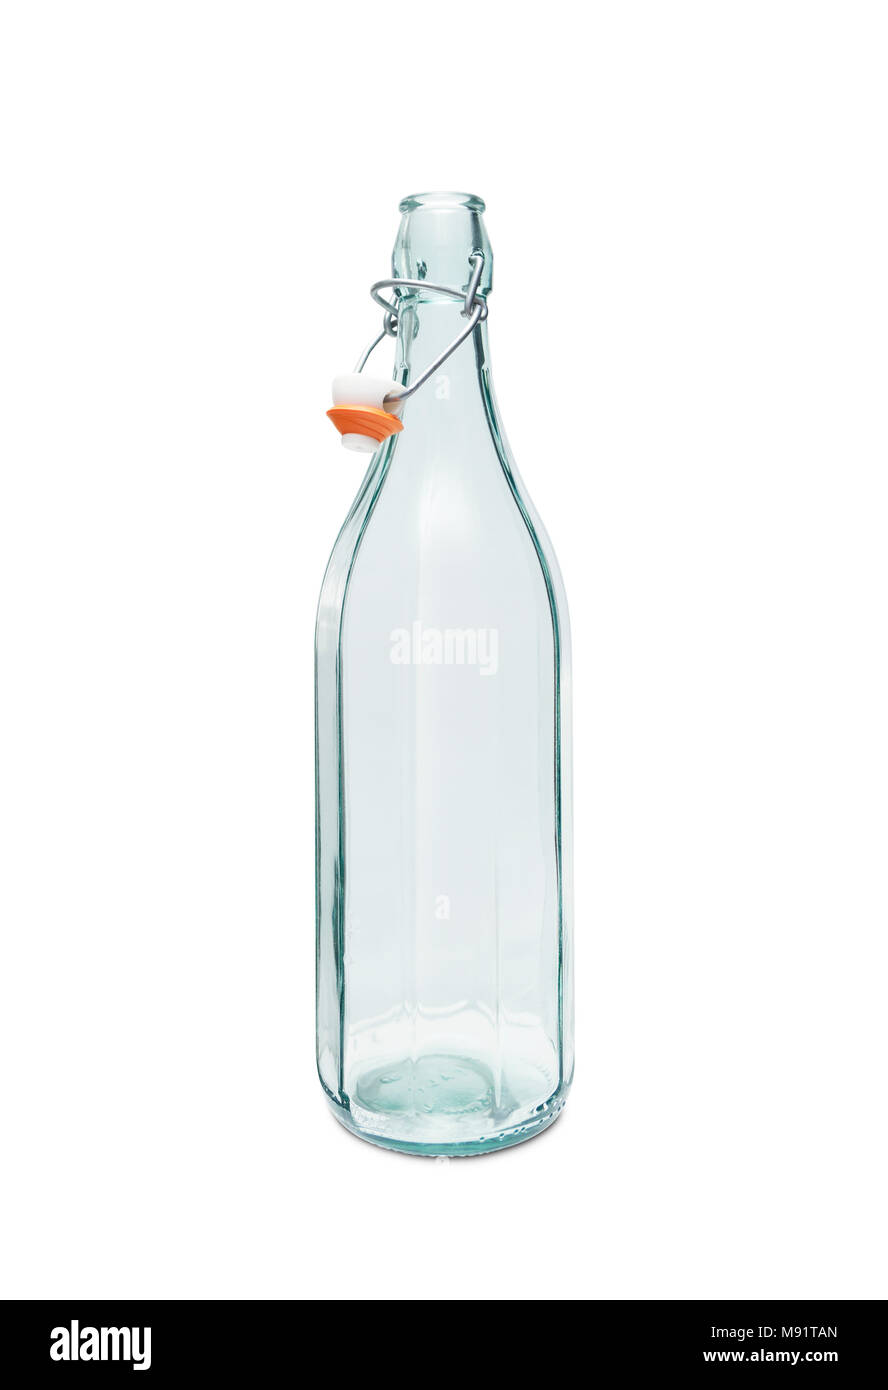 https://c8.alamy.com/comp/M91TAN/empty-vintage-bottle-isolated-on-white-background-with-clipping-path-M91TAN.jpg